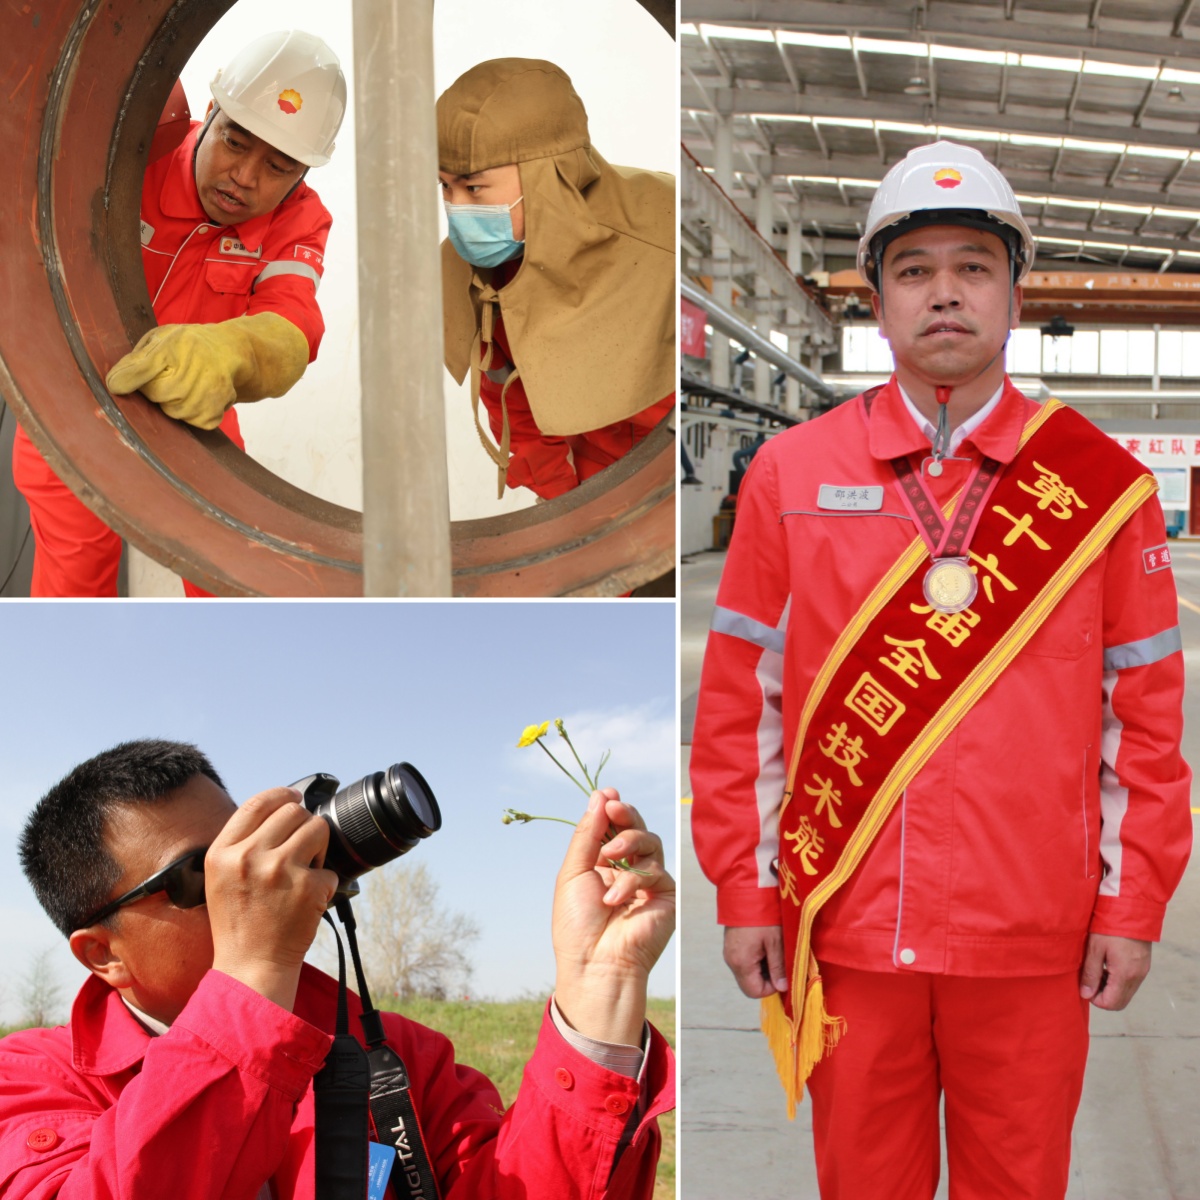 👷‍♂️Meet Shao Hongbo, a welding instructor at #CNPC CPP with a 33-year career. He pioneered the 'pulsation method' of welding, achieving wrist precision of 0.3 mm.✨ Outside work, he captures life's beauty through his camera.📸 #Craftsmanship #LabourDay #CNPCer #SkilledWorkers